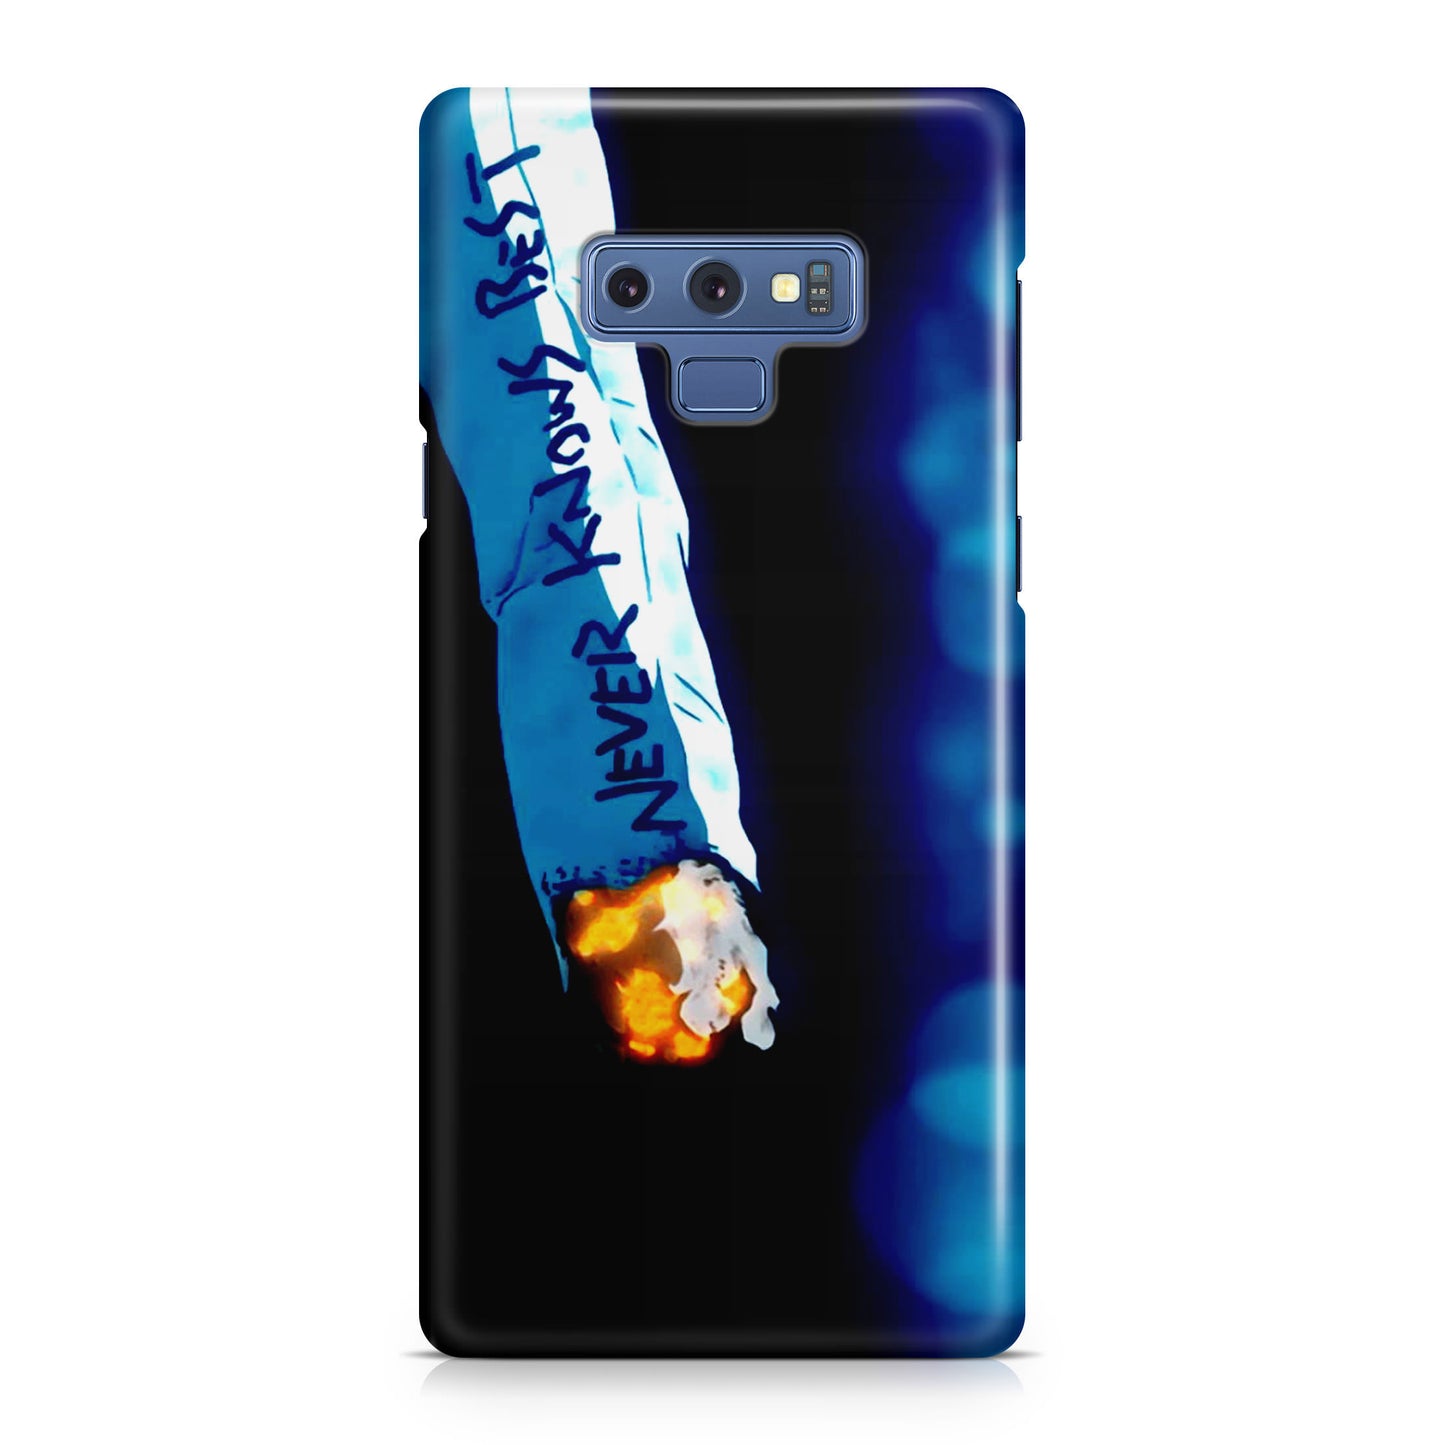 Never Knows Best Galaxy Note 9 Case